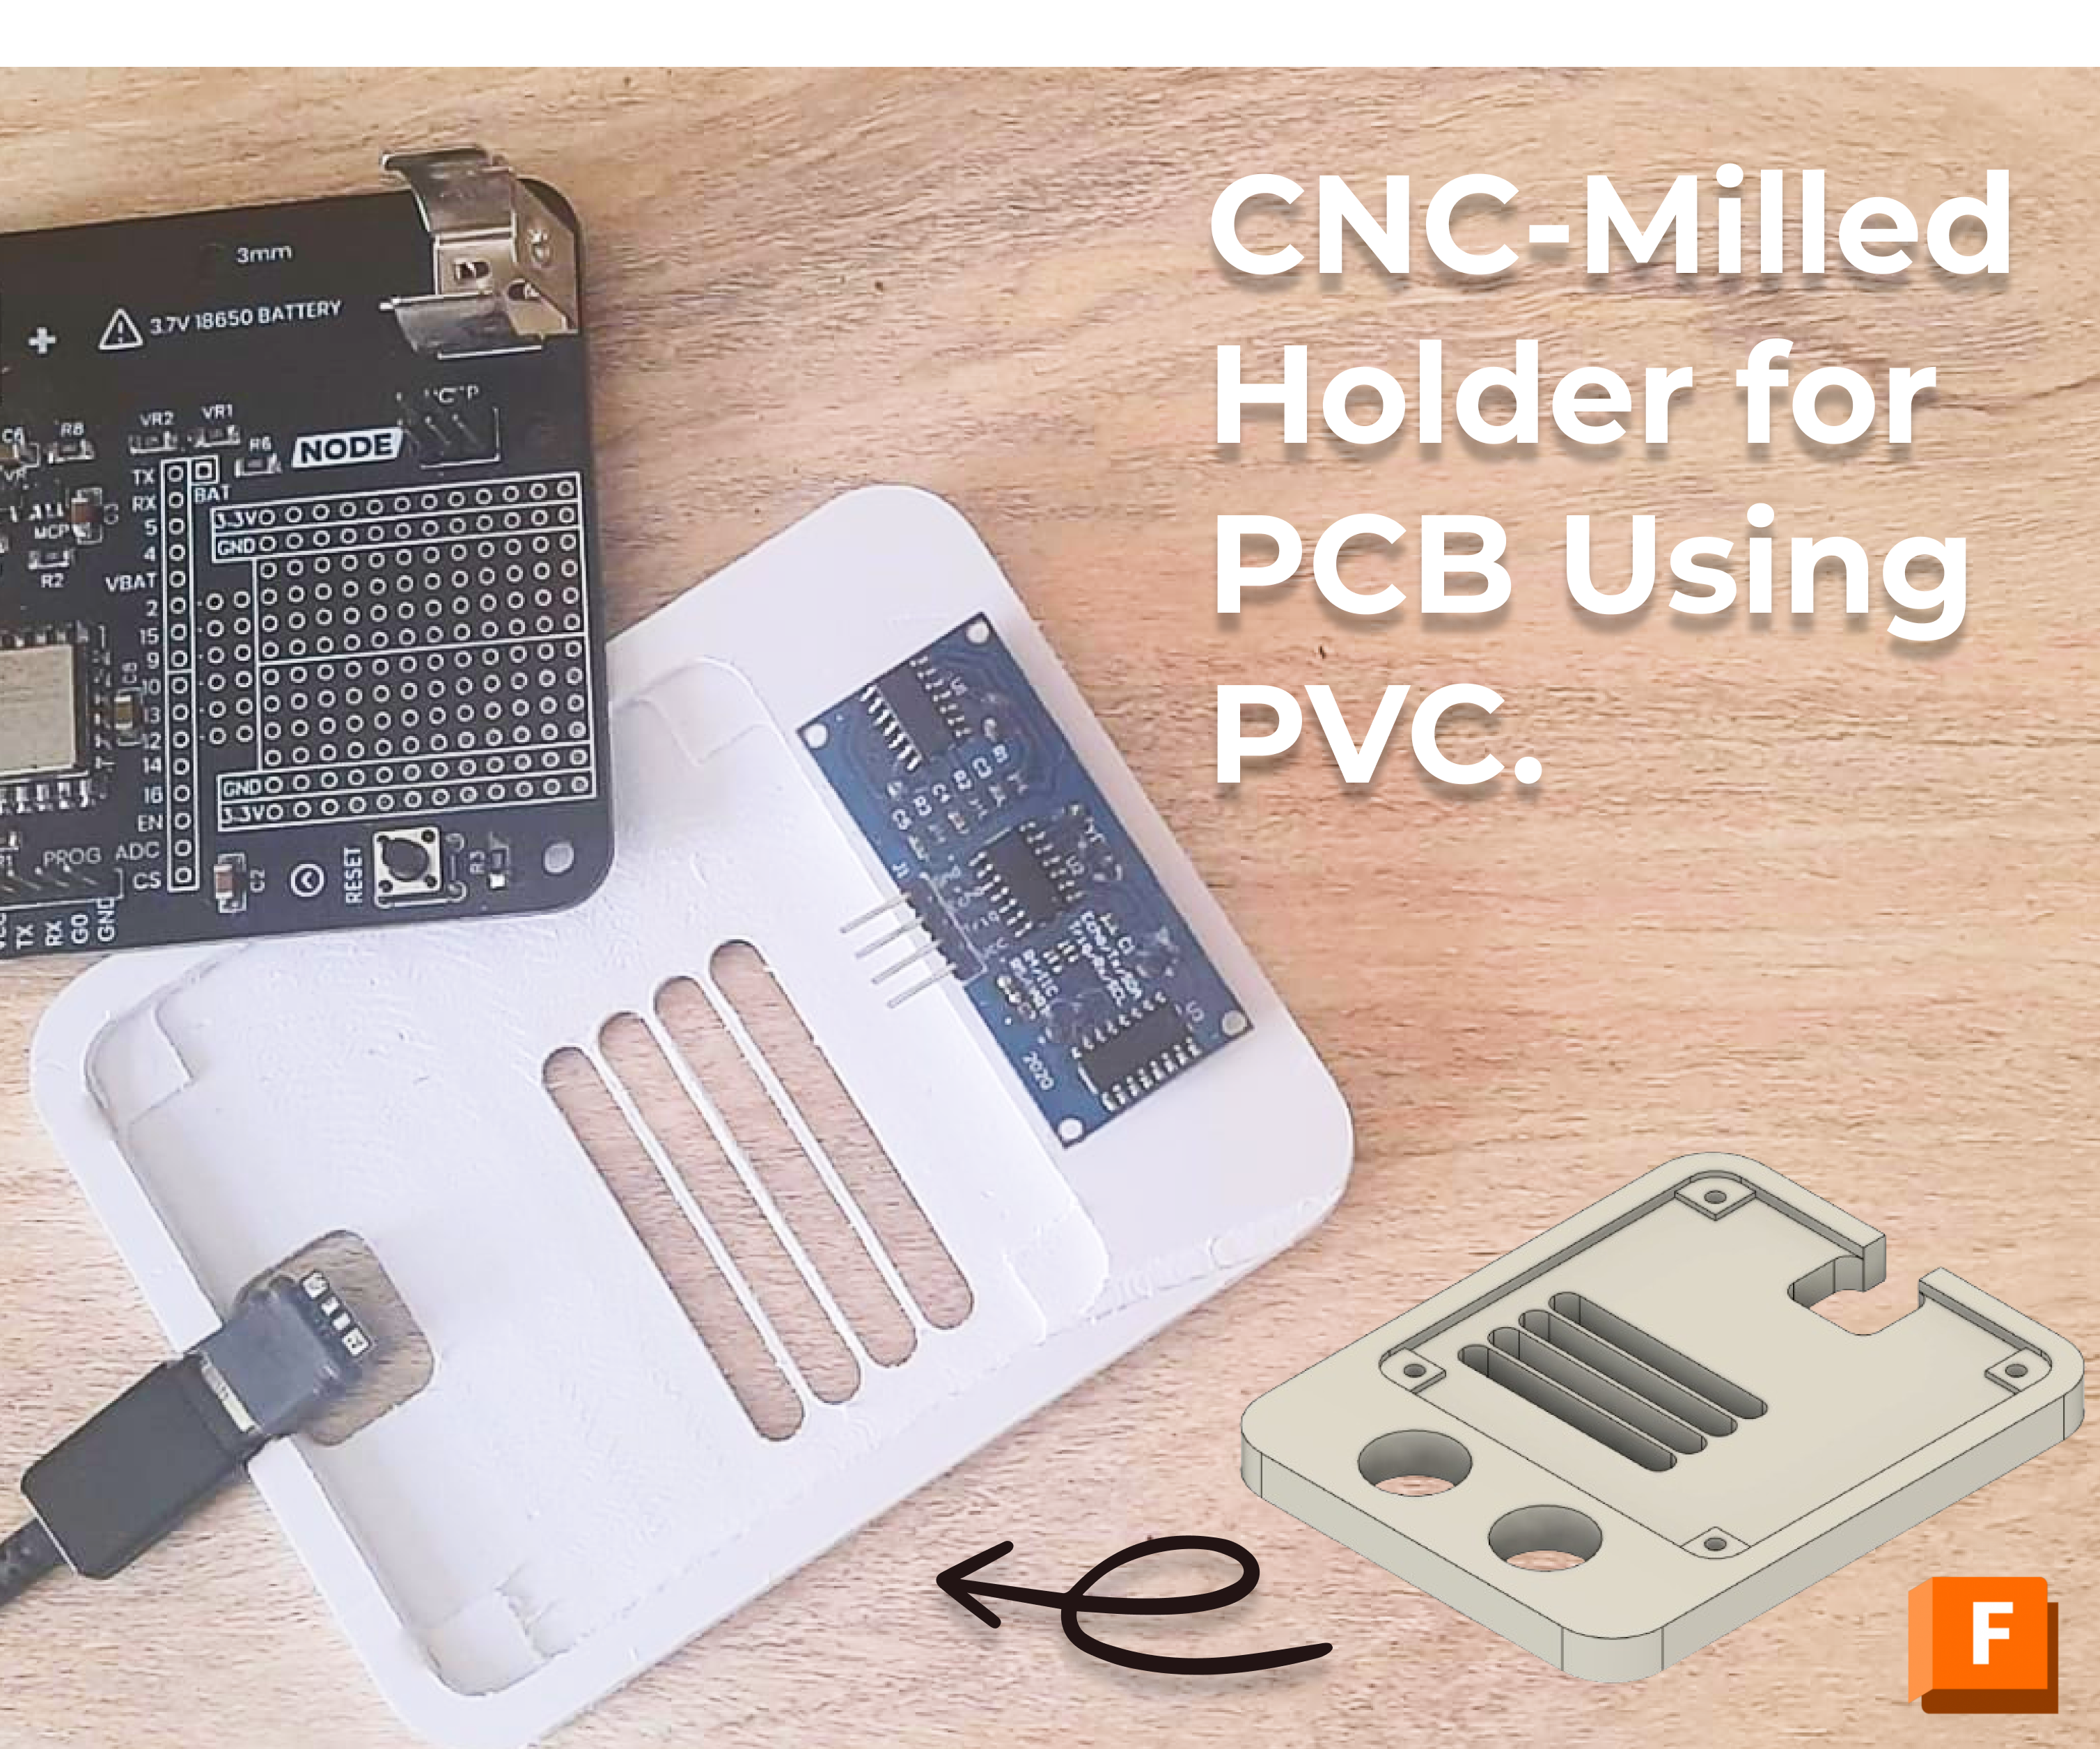 CNC-Milled Holder for PCB Using PVC.